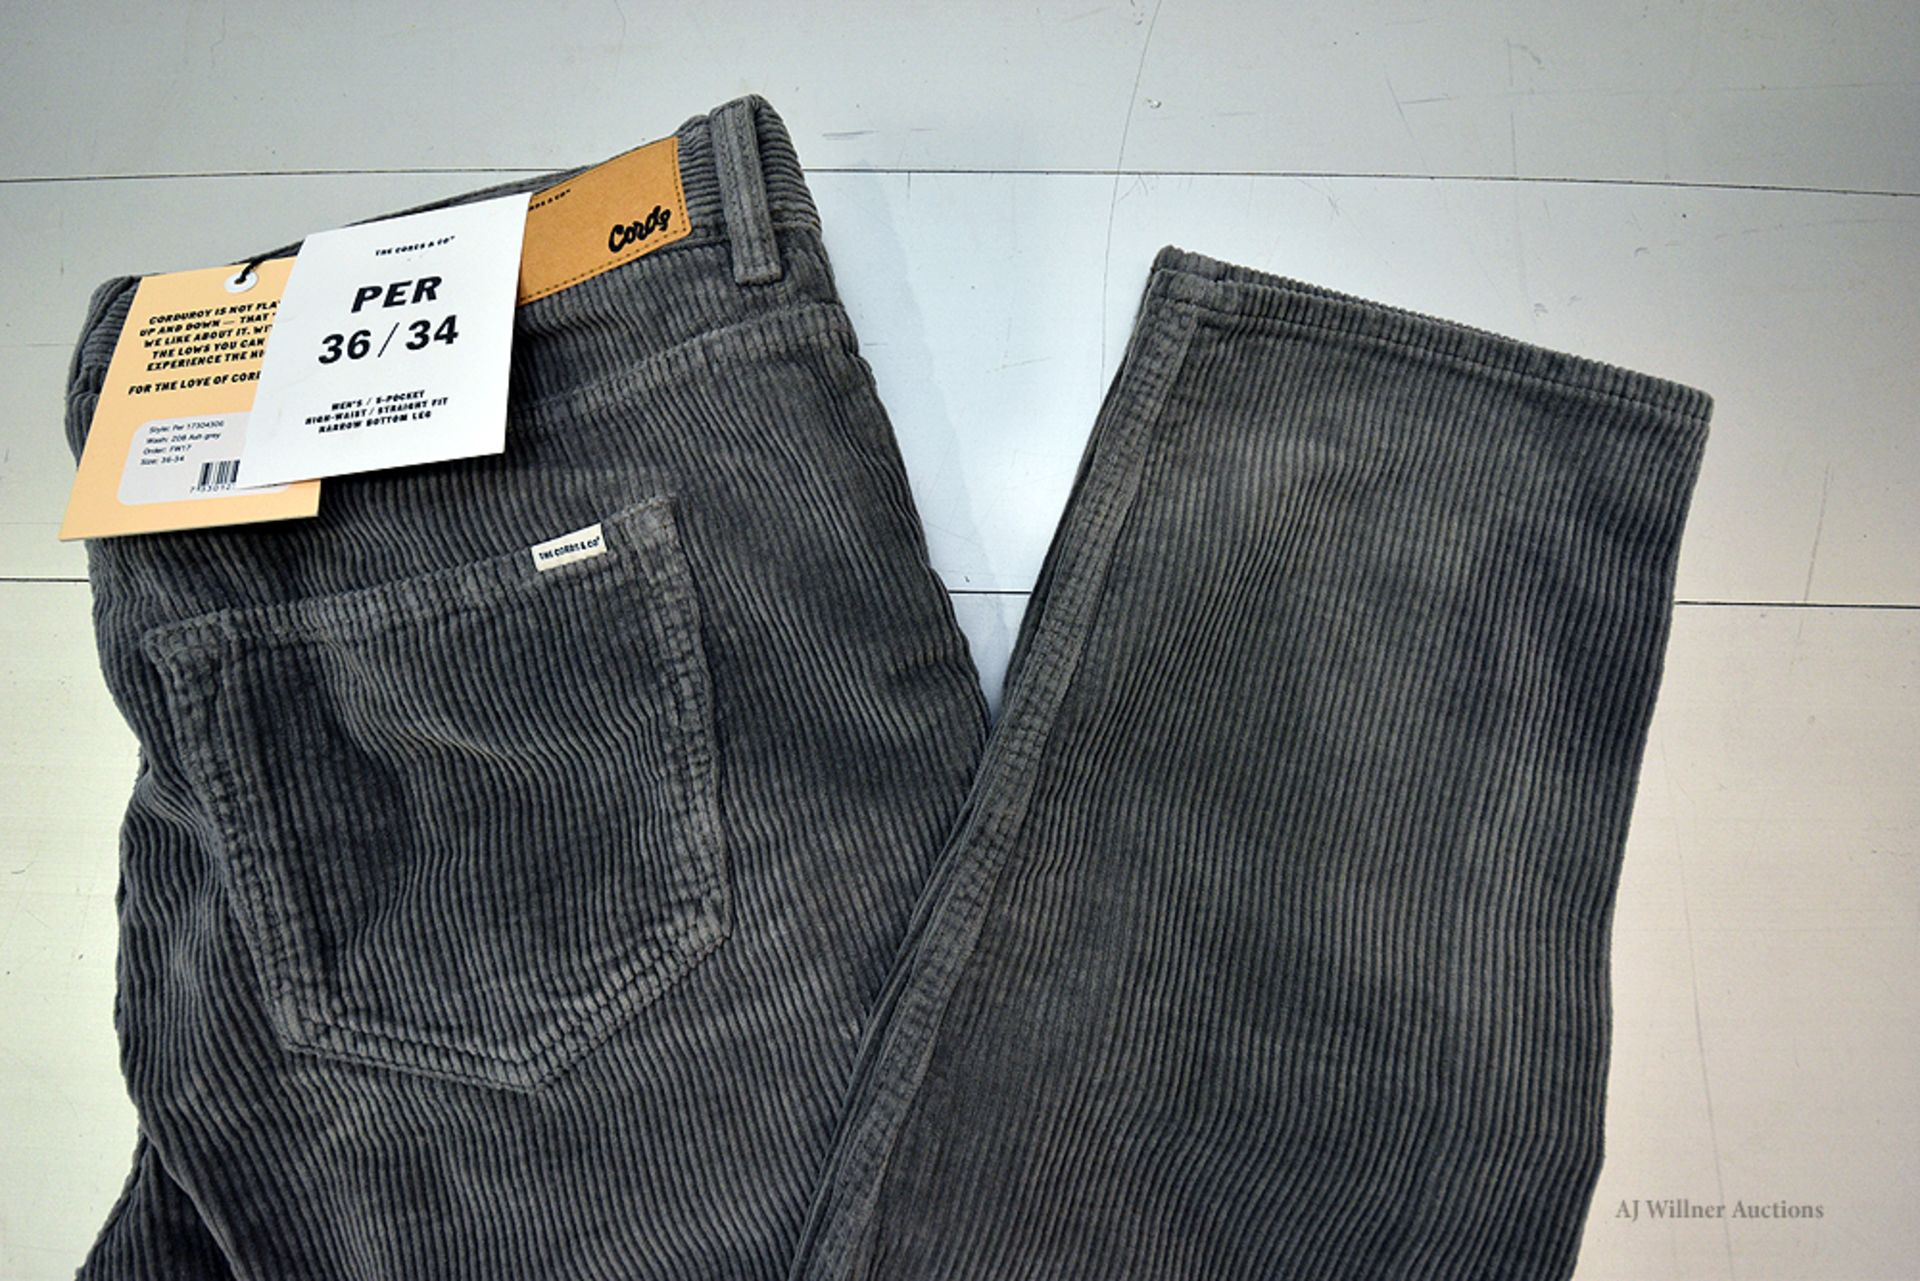 The Cords & Co. "Per" Style, Men's/5-Pocket/High-Waist/ Straight Fit/ Narrow Bottom Leg - Image 3 of 5